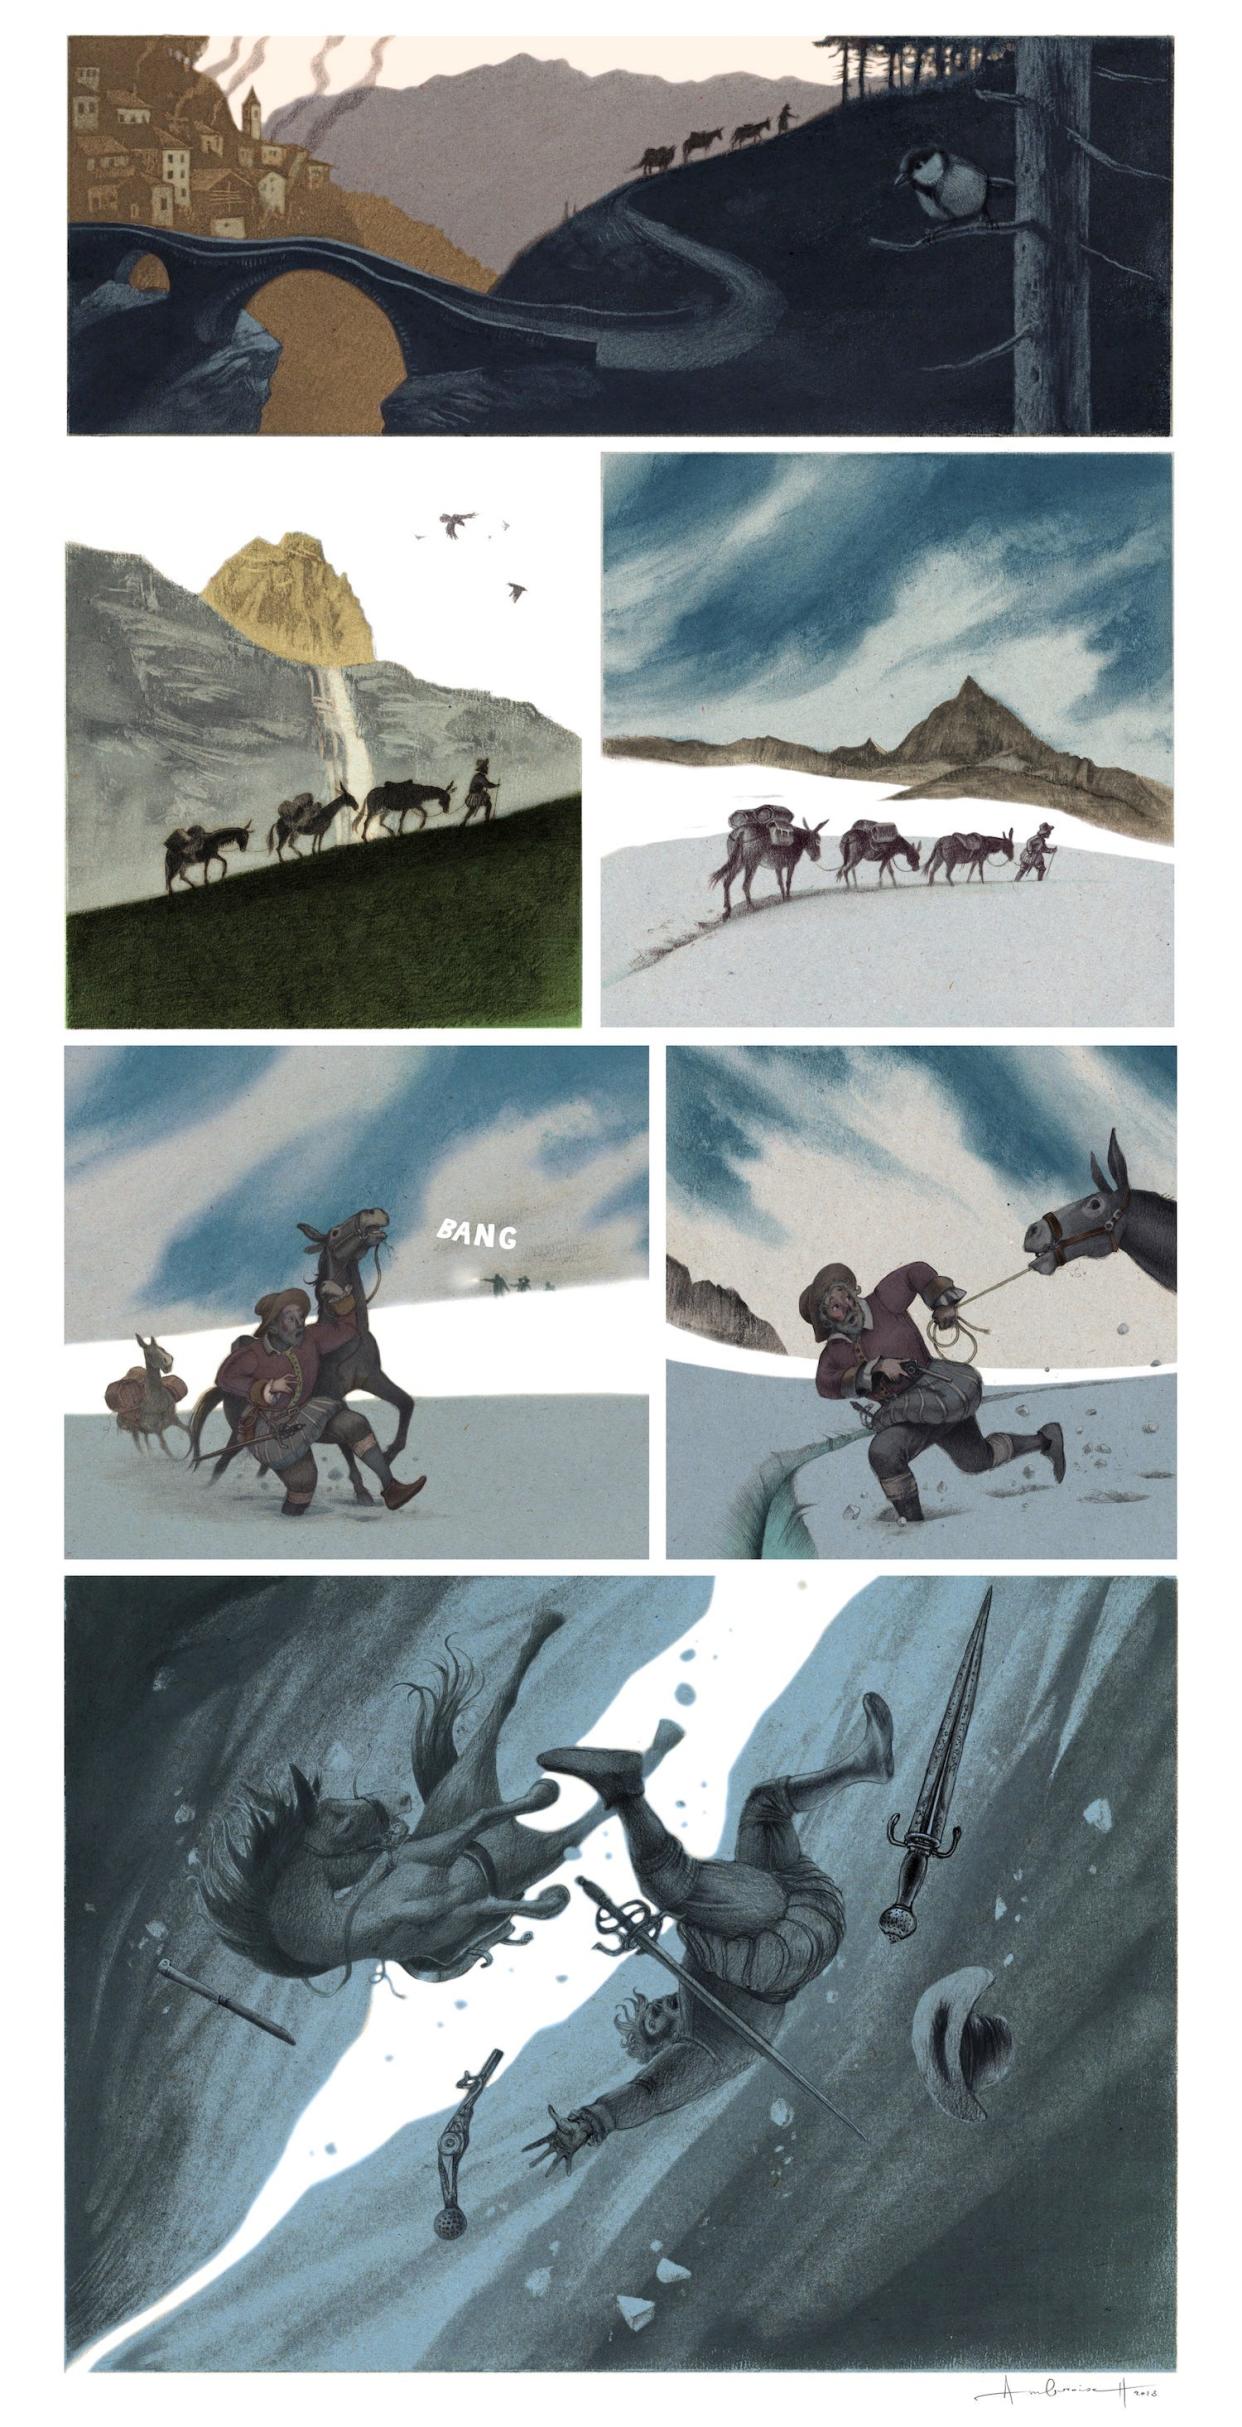 illustrated comic strip showing a man in medieval garb walking with a line of three mules out of a town, up a mountain, and onto a glacier, then falling into a giant crevasse, in six panels